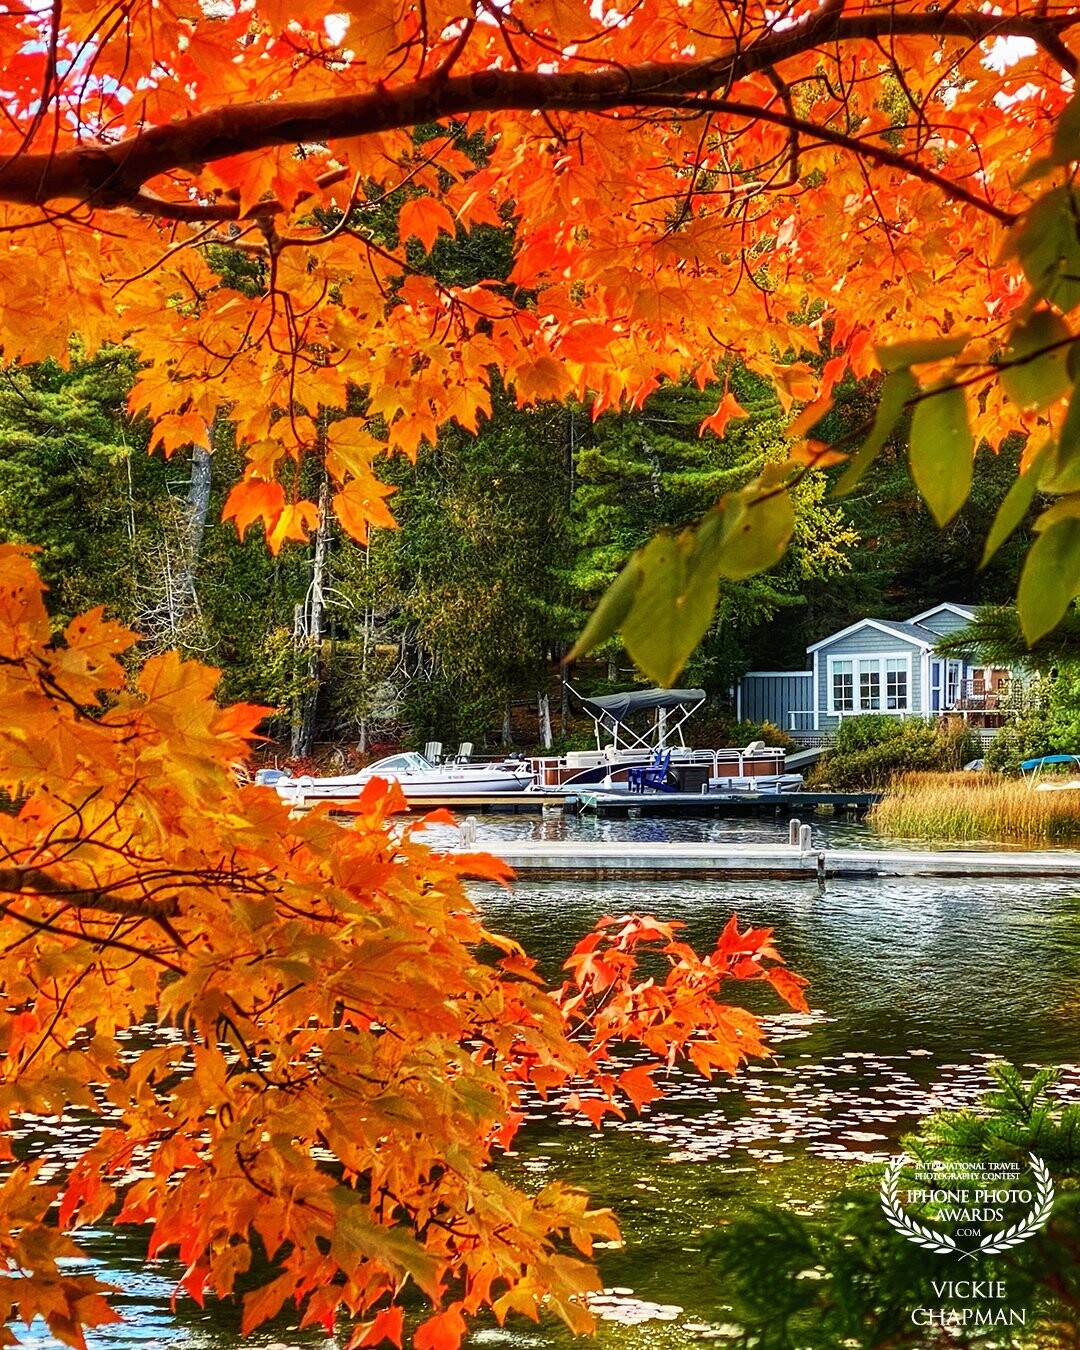 I was drawn to the beautiful bright autumnal leaves when I noticed that this made wonderful frame for the nearby home! This marvelous place is in Mount Desert Island, Maine, USA. Slight edits were made with Snapseed.